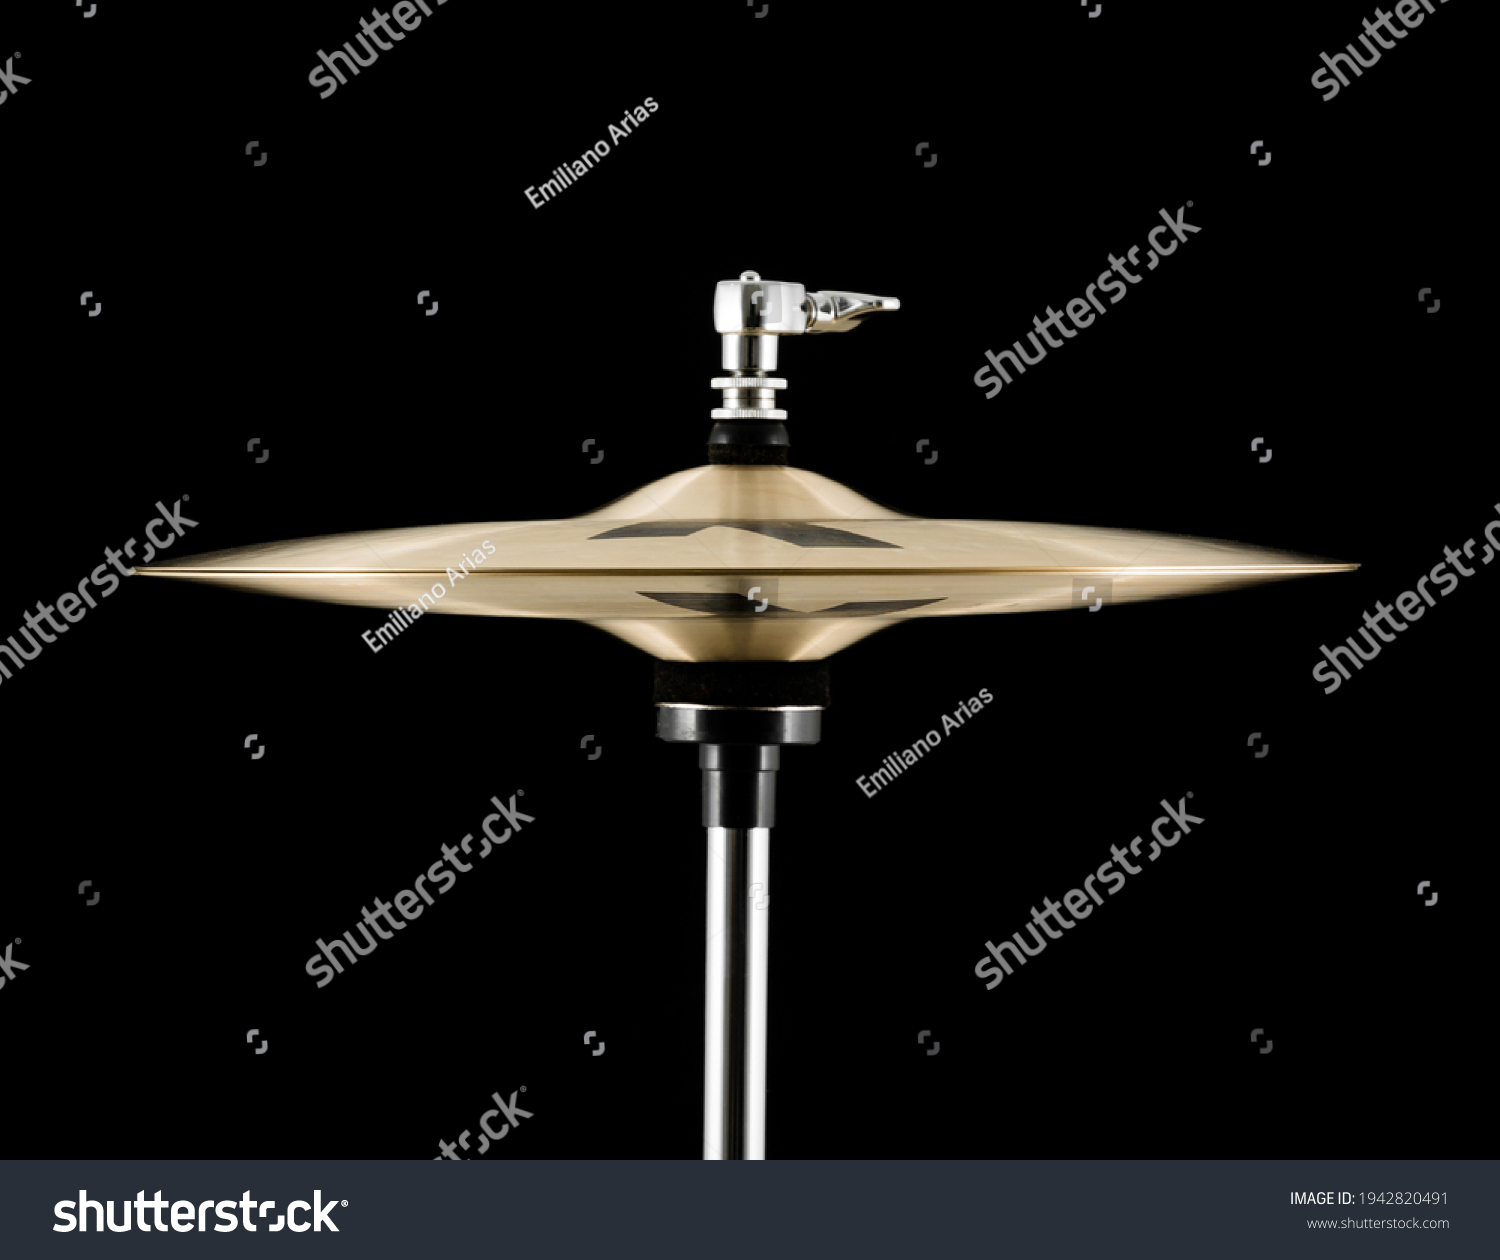 Hi-hat cymbals from the side isolated on black background #1942820491